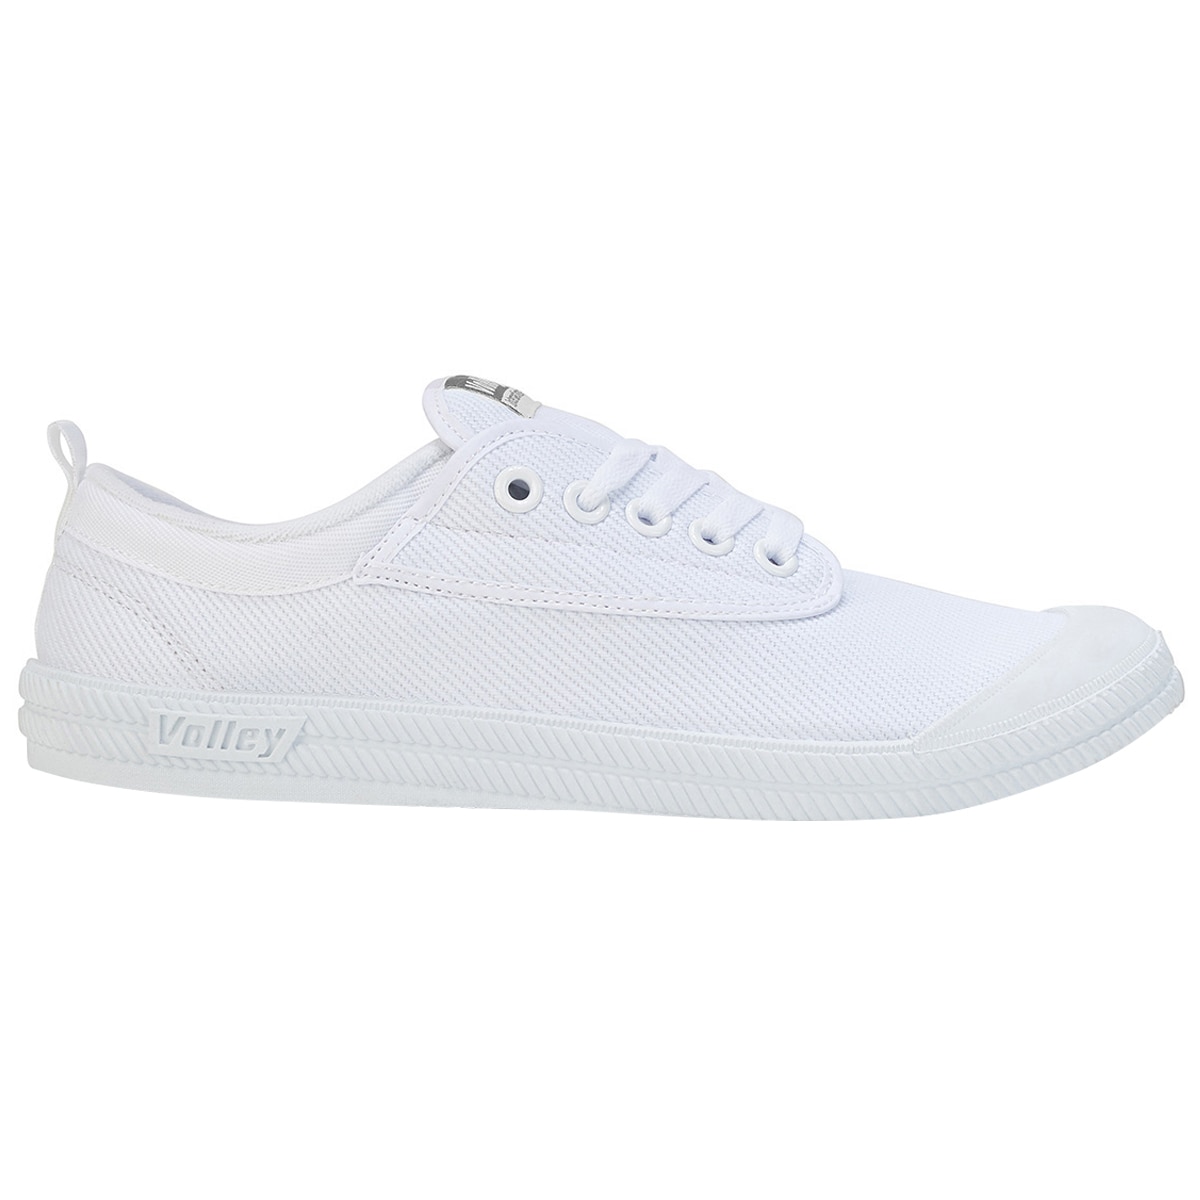 Volley Shoes - White